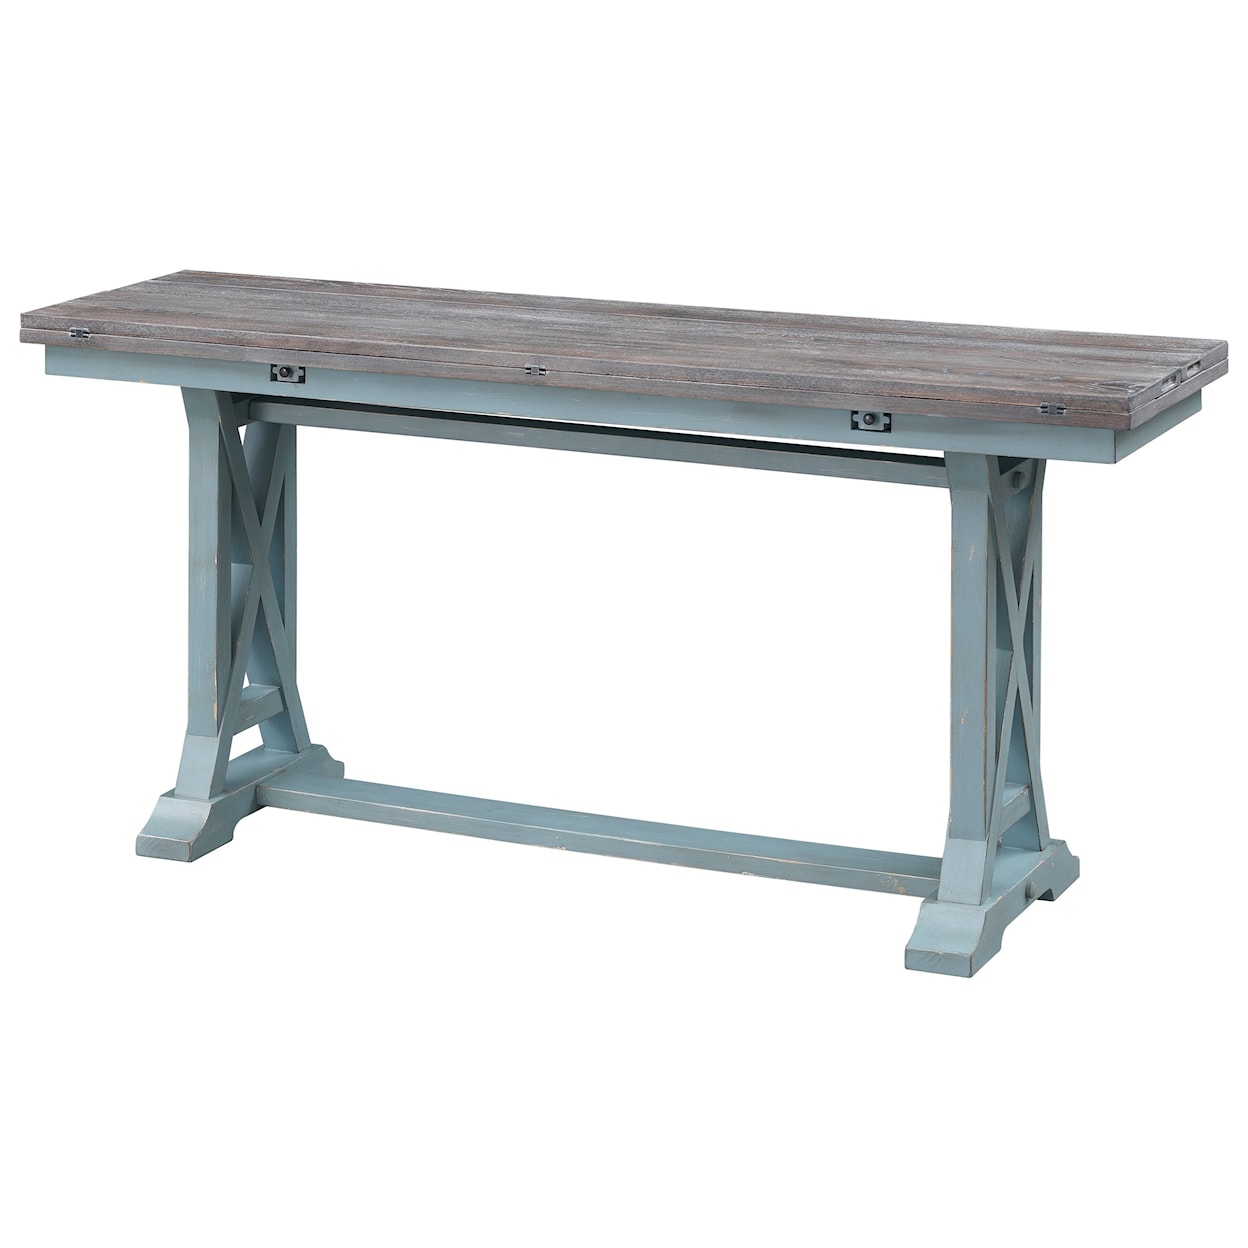 C2C Bar Harbor Fold-Out Console Table